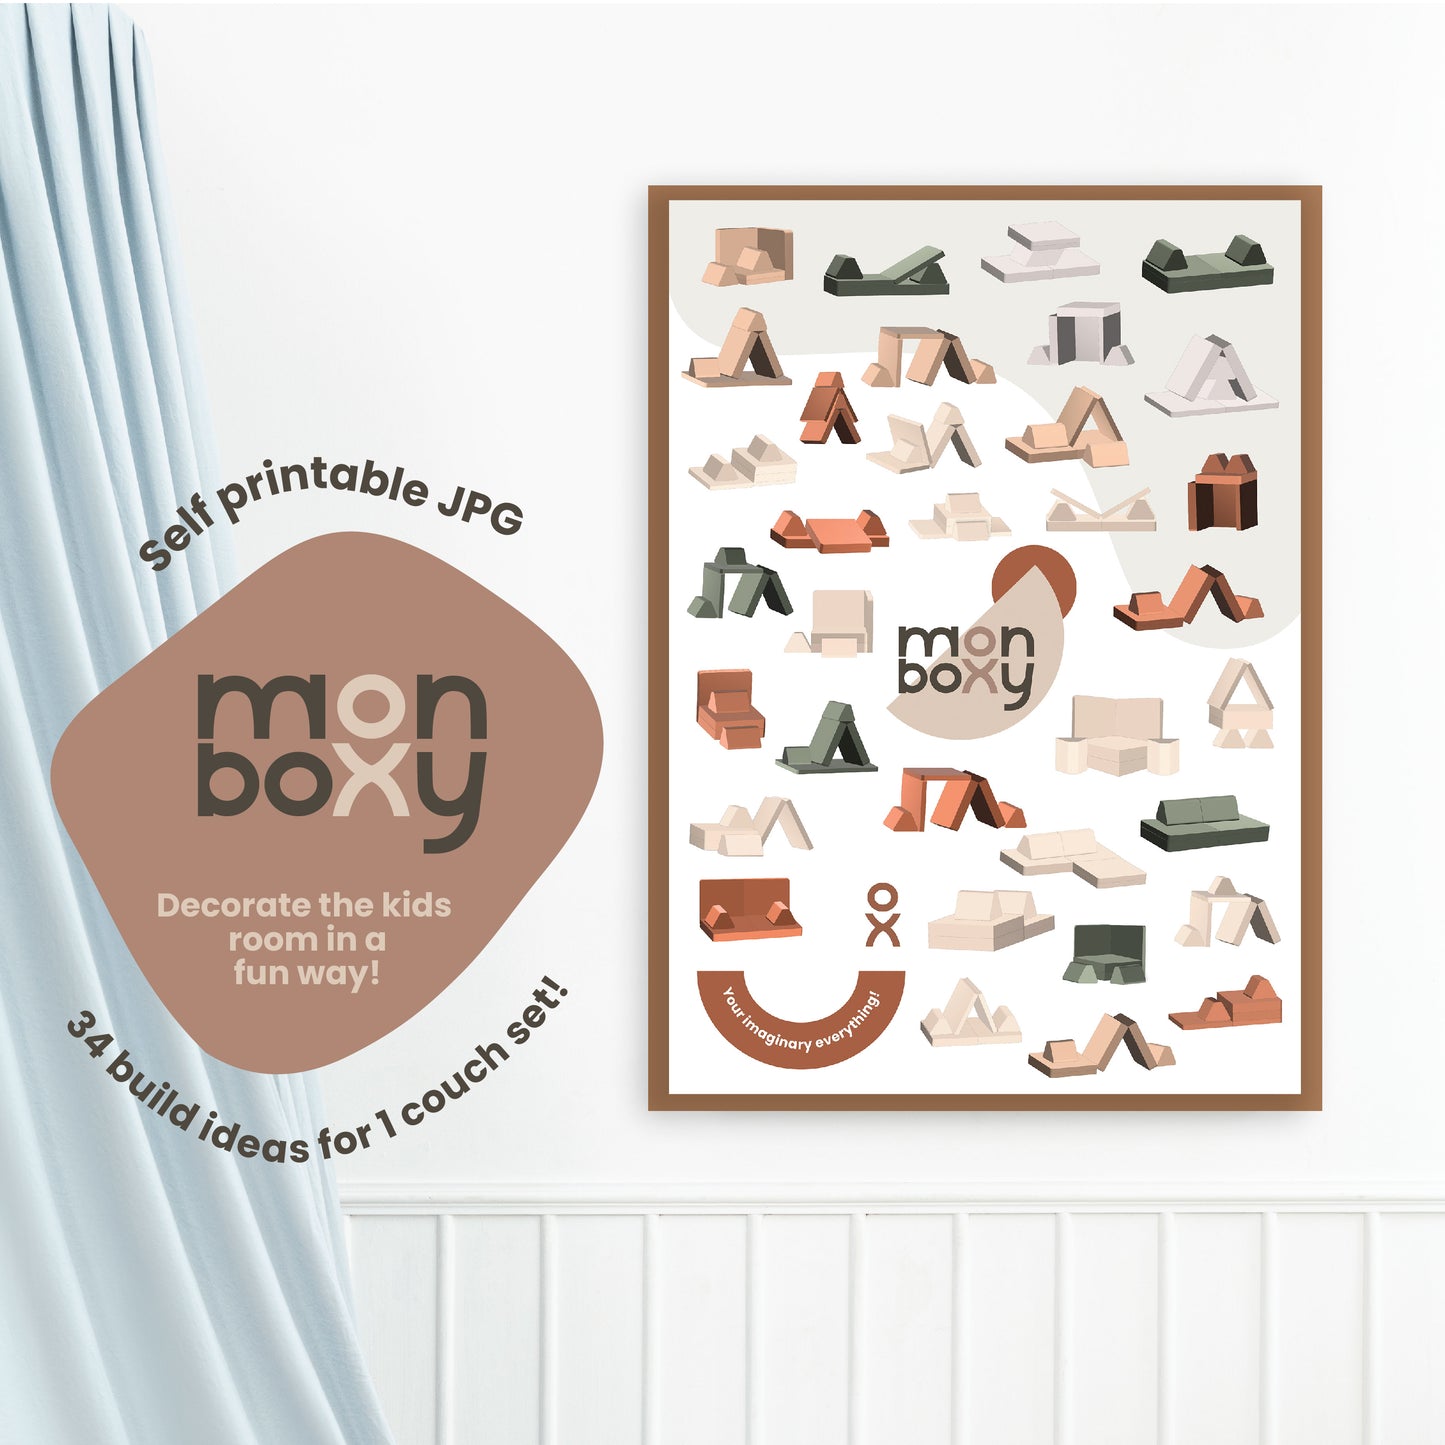 A Sweet HOME from wood printable poster featuring a set of foam blocks for kids.